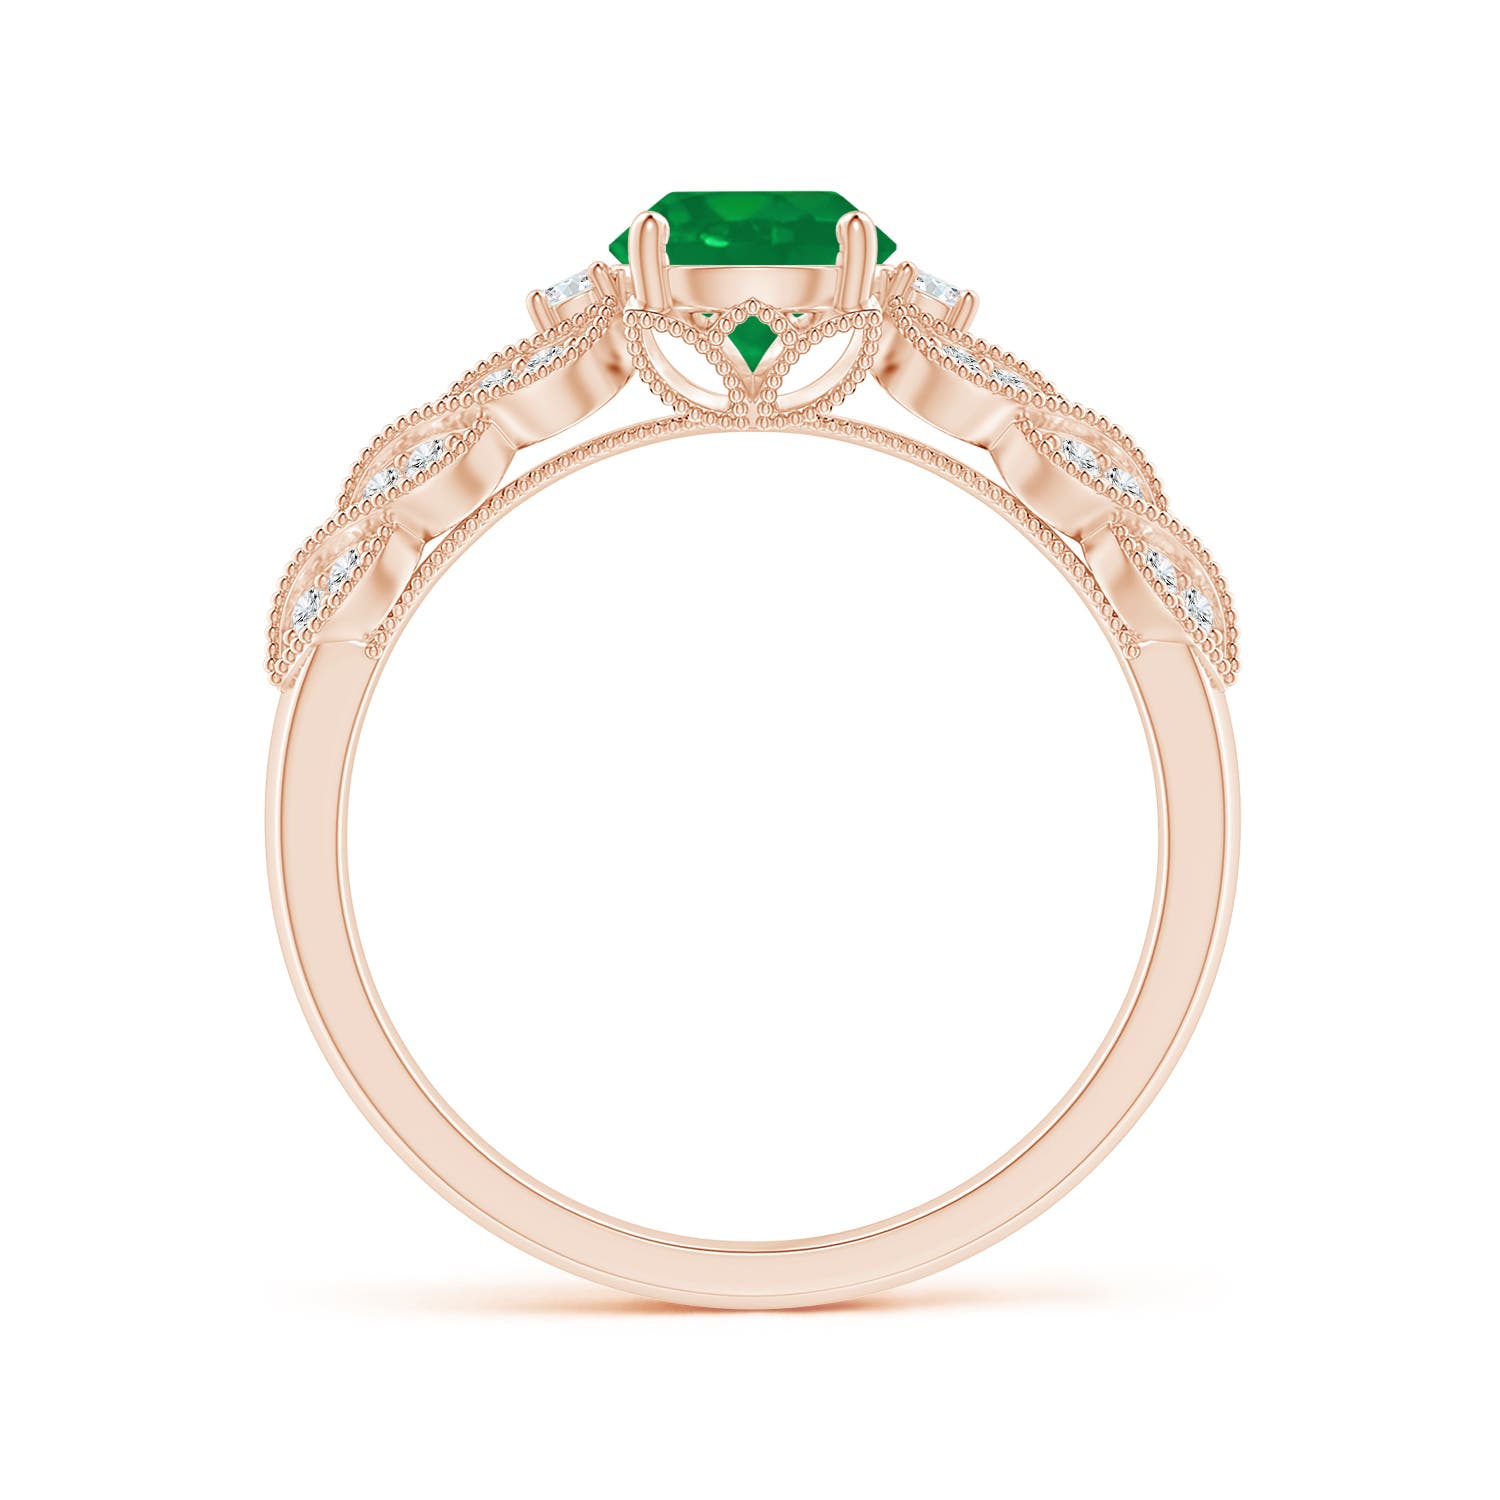 AA - Emerald / 0.94 CT / 14 KT Rose Gold